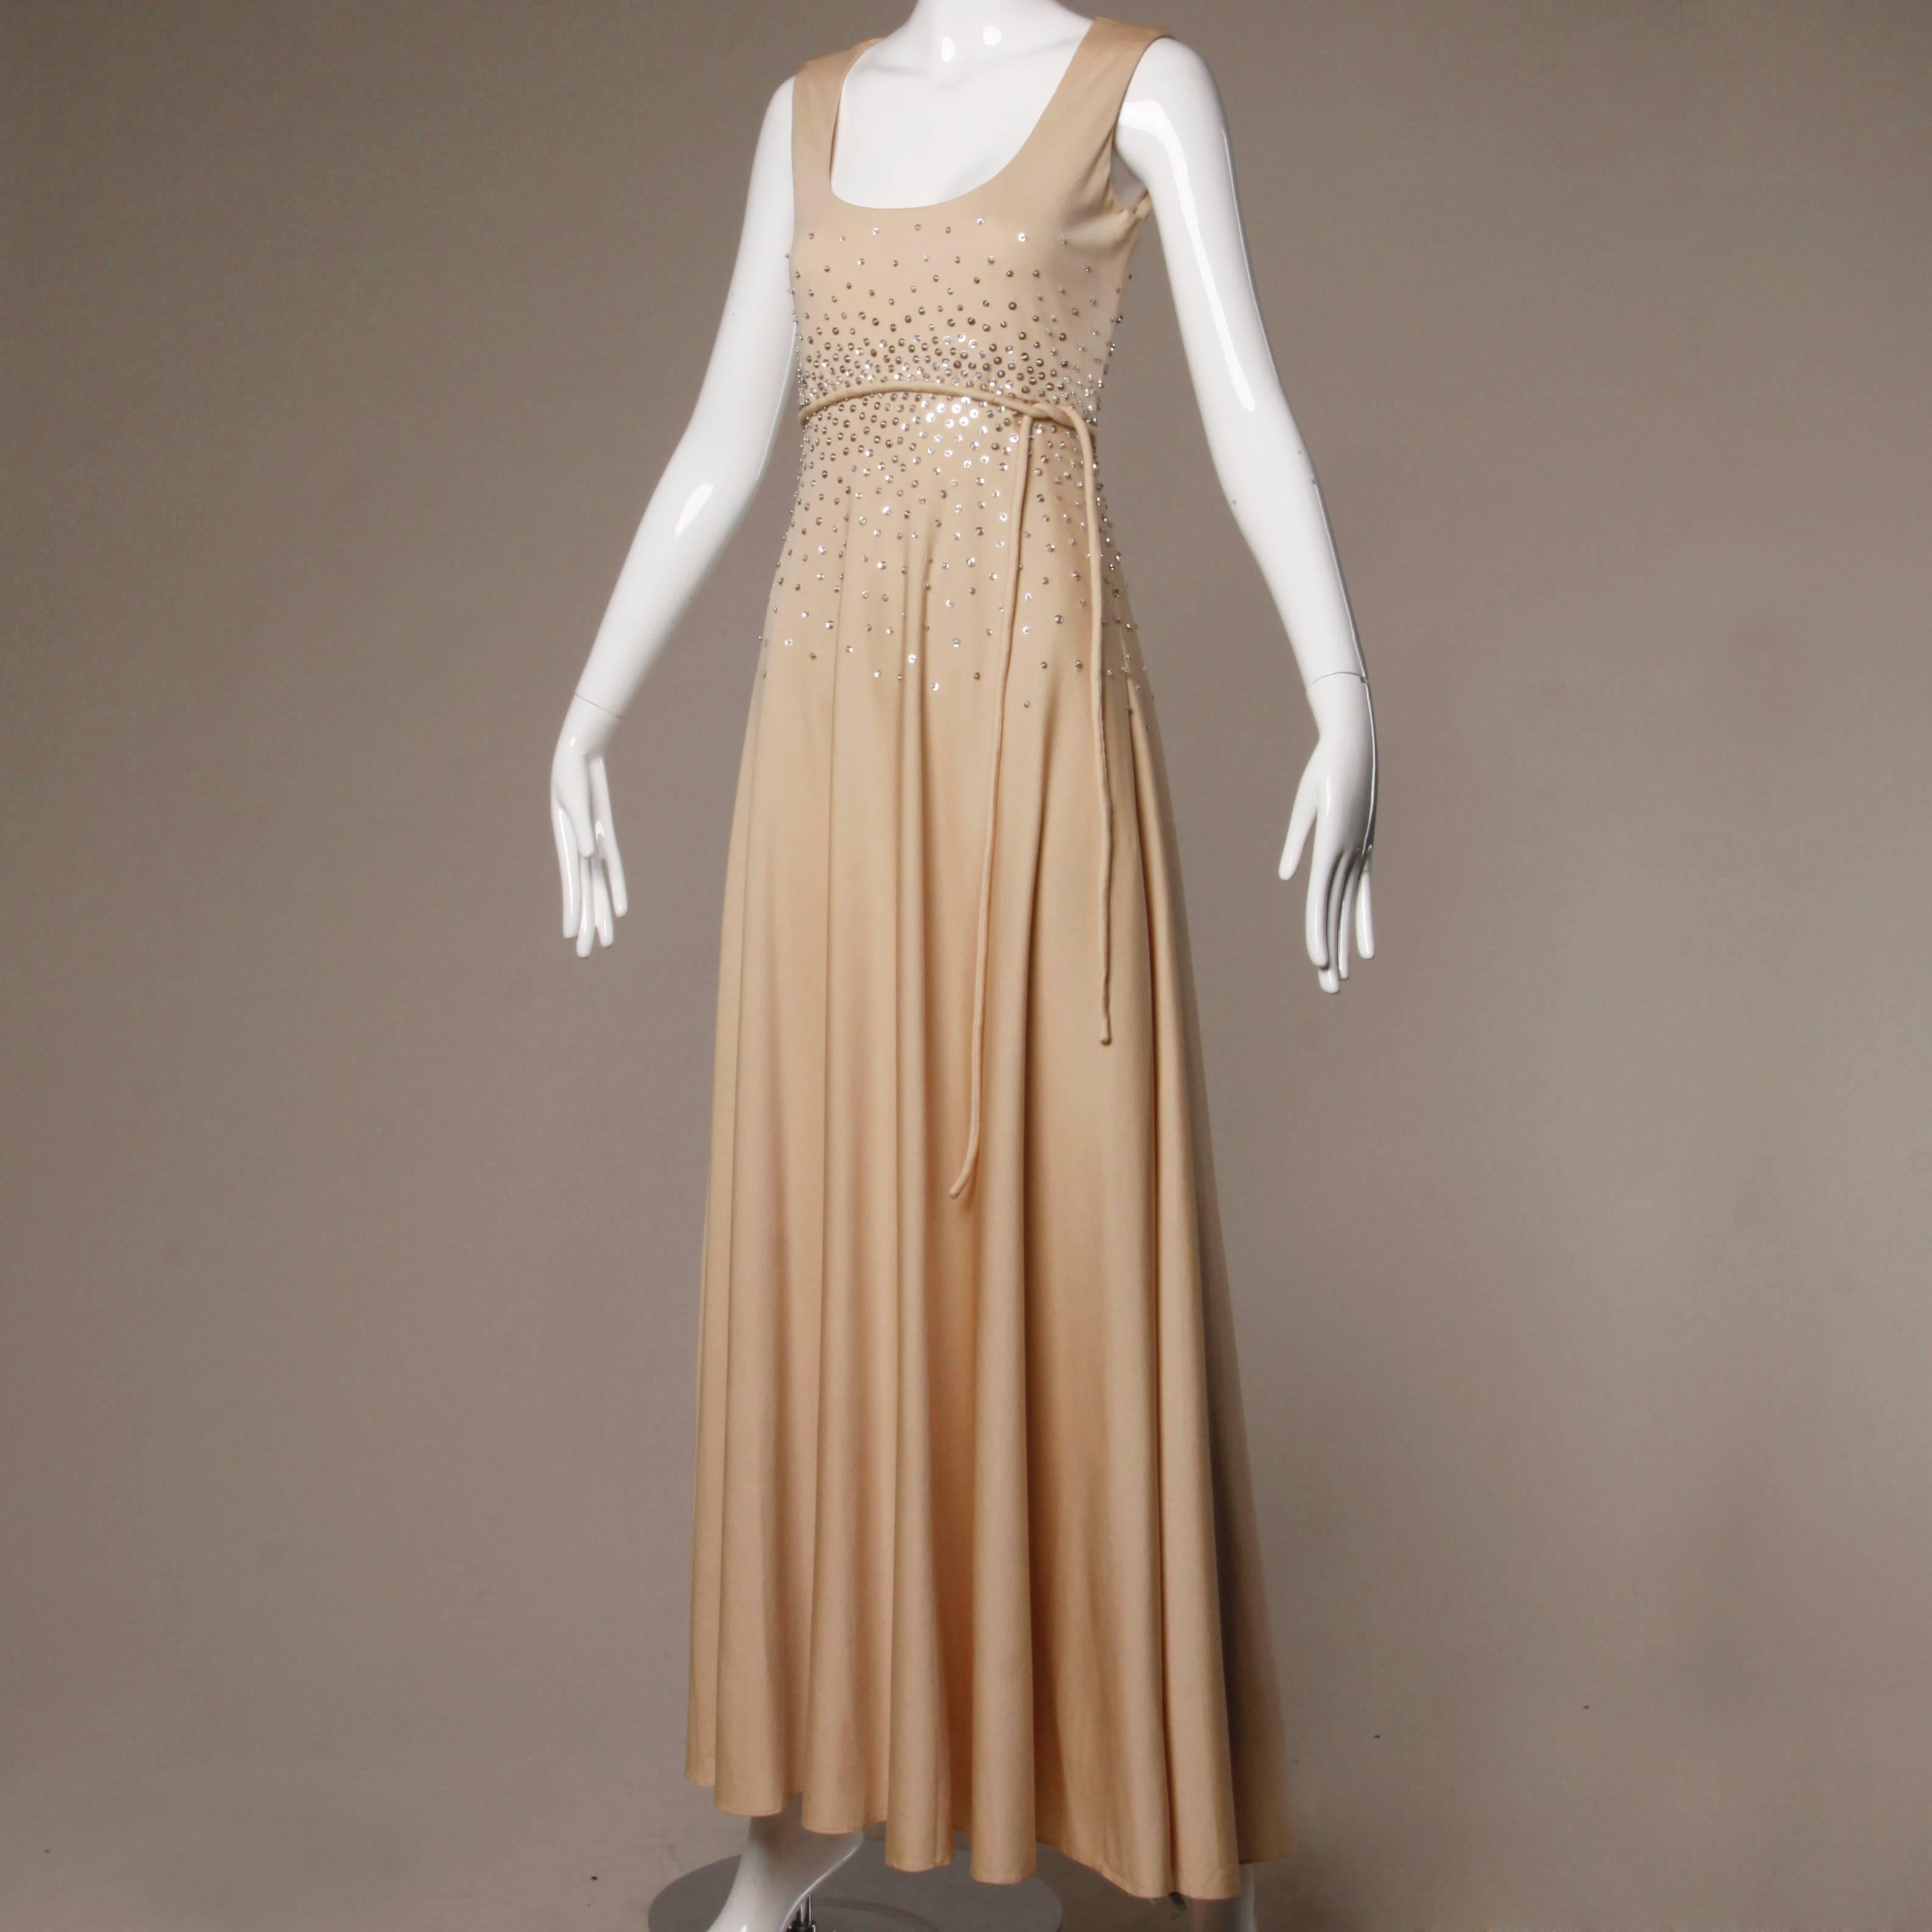 Stunning vintage nude jersey knit maxi dress with an empire waist and silver sequins. 

Details:

Fully Lined
Matching Belt
Back Metal Zip and Hook Closure
Marked Size: Not Marked
Estimated Size: S-M
Color: Beige/ Silver Metallic 
Fabric: